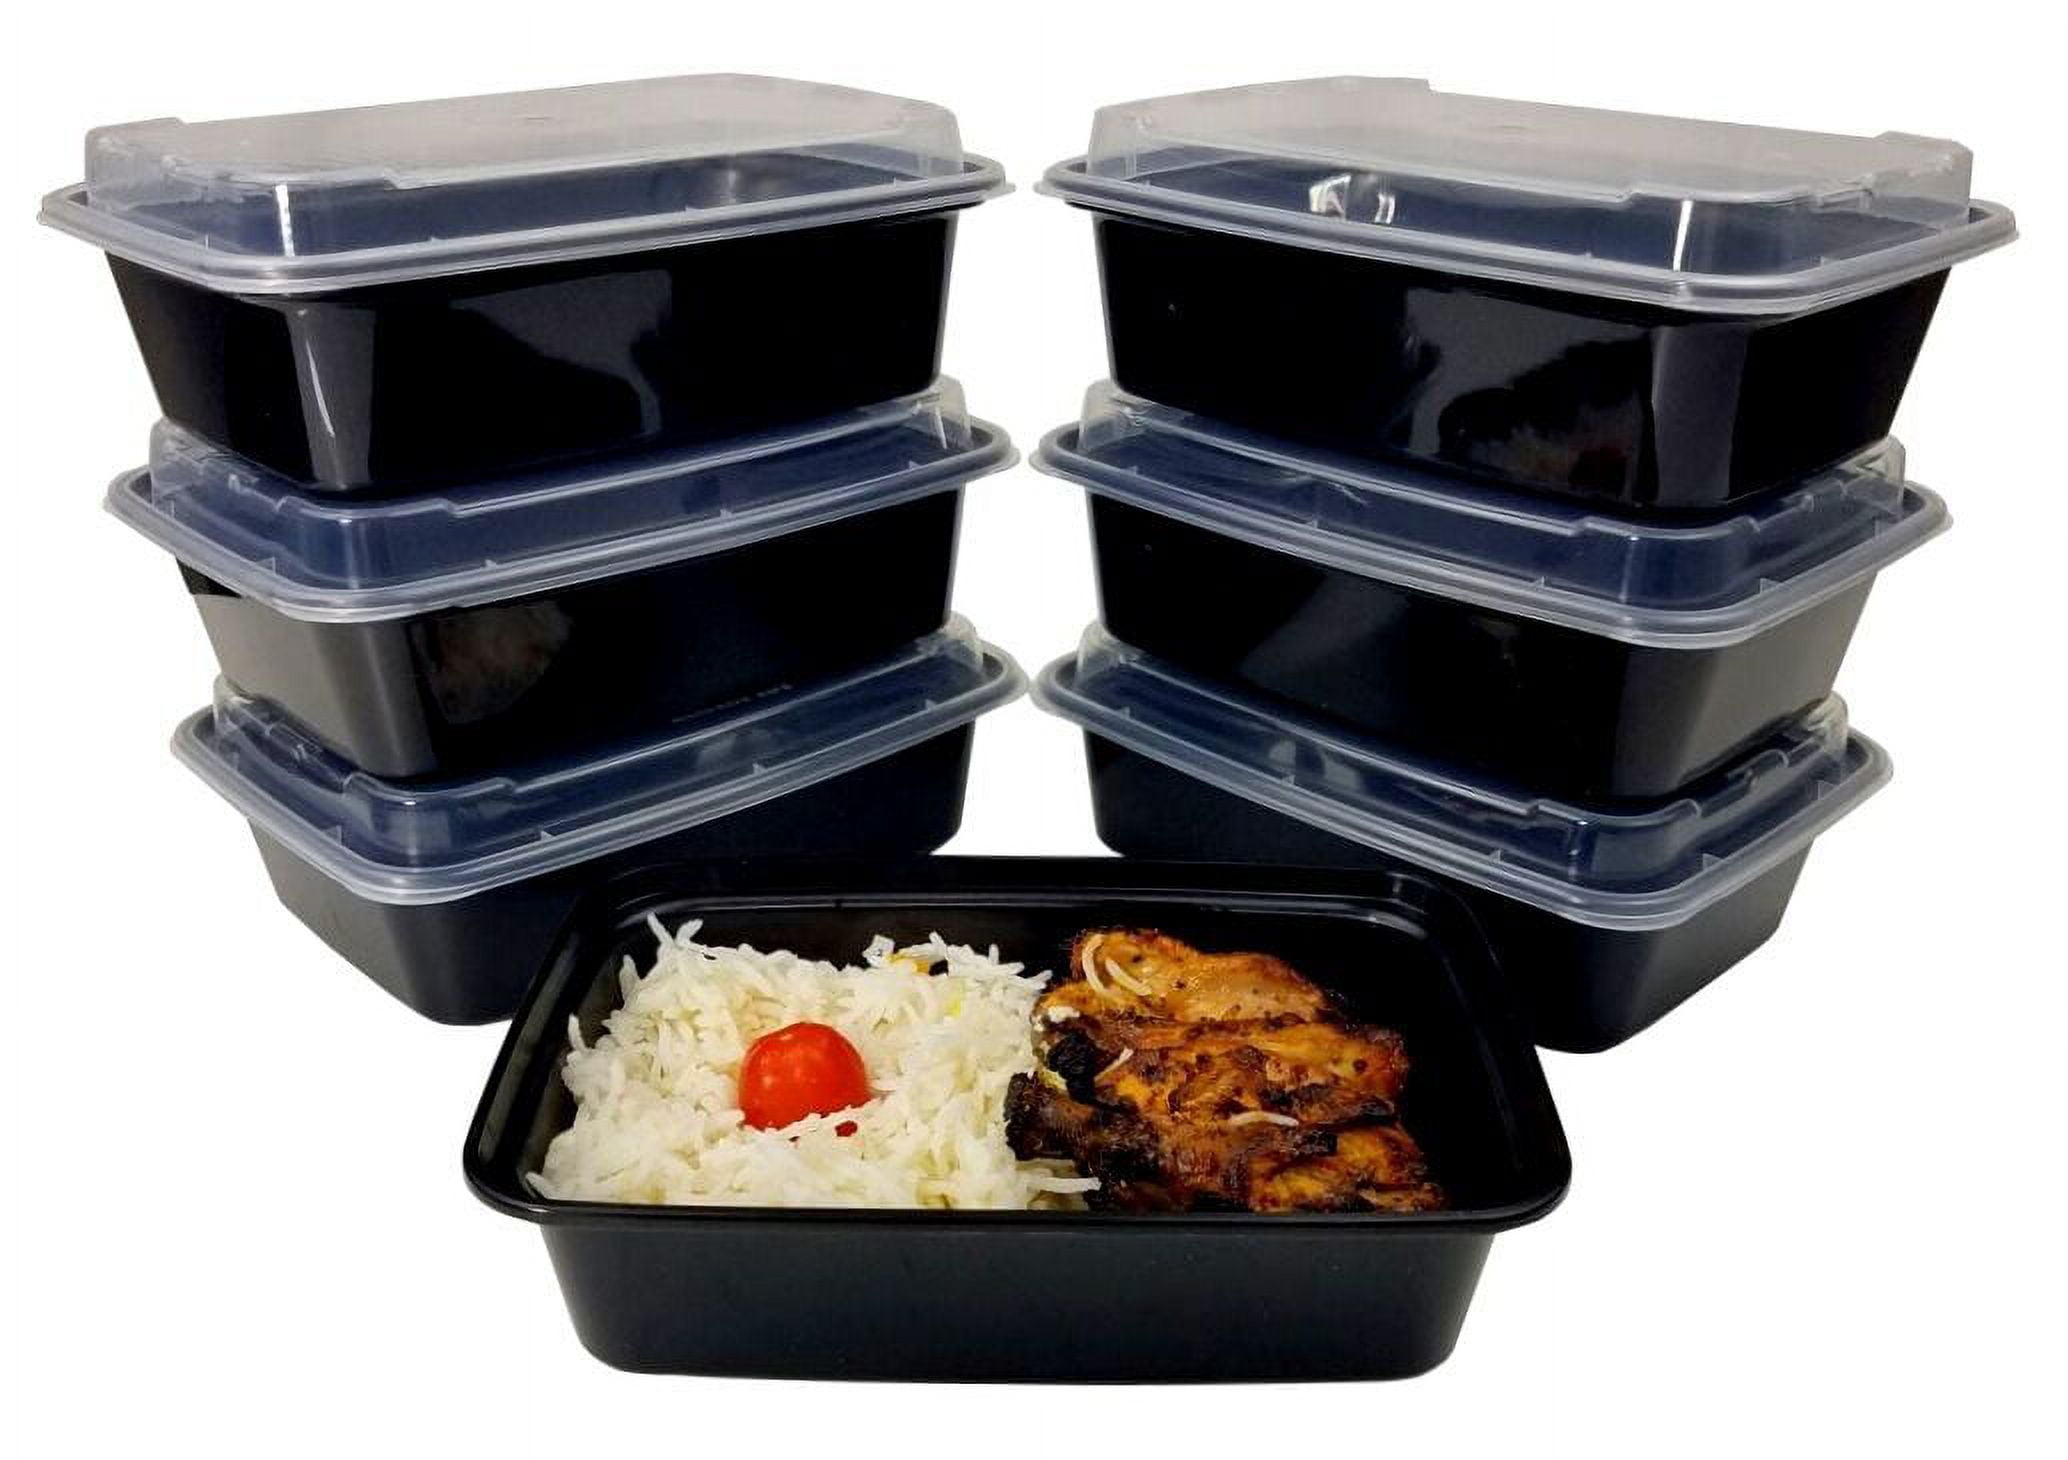 25 Set]24 oz Meal Prep Food Containers with Lids Reusable